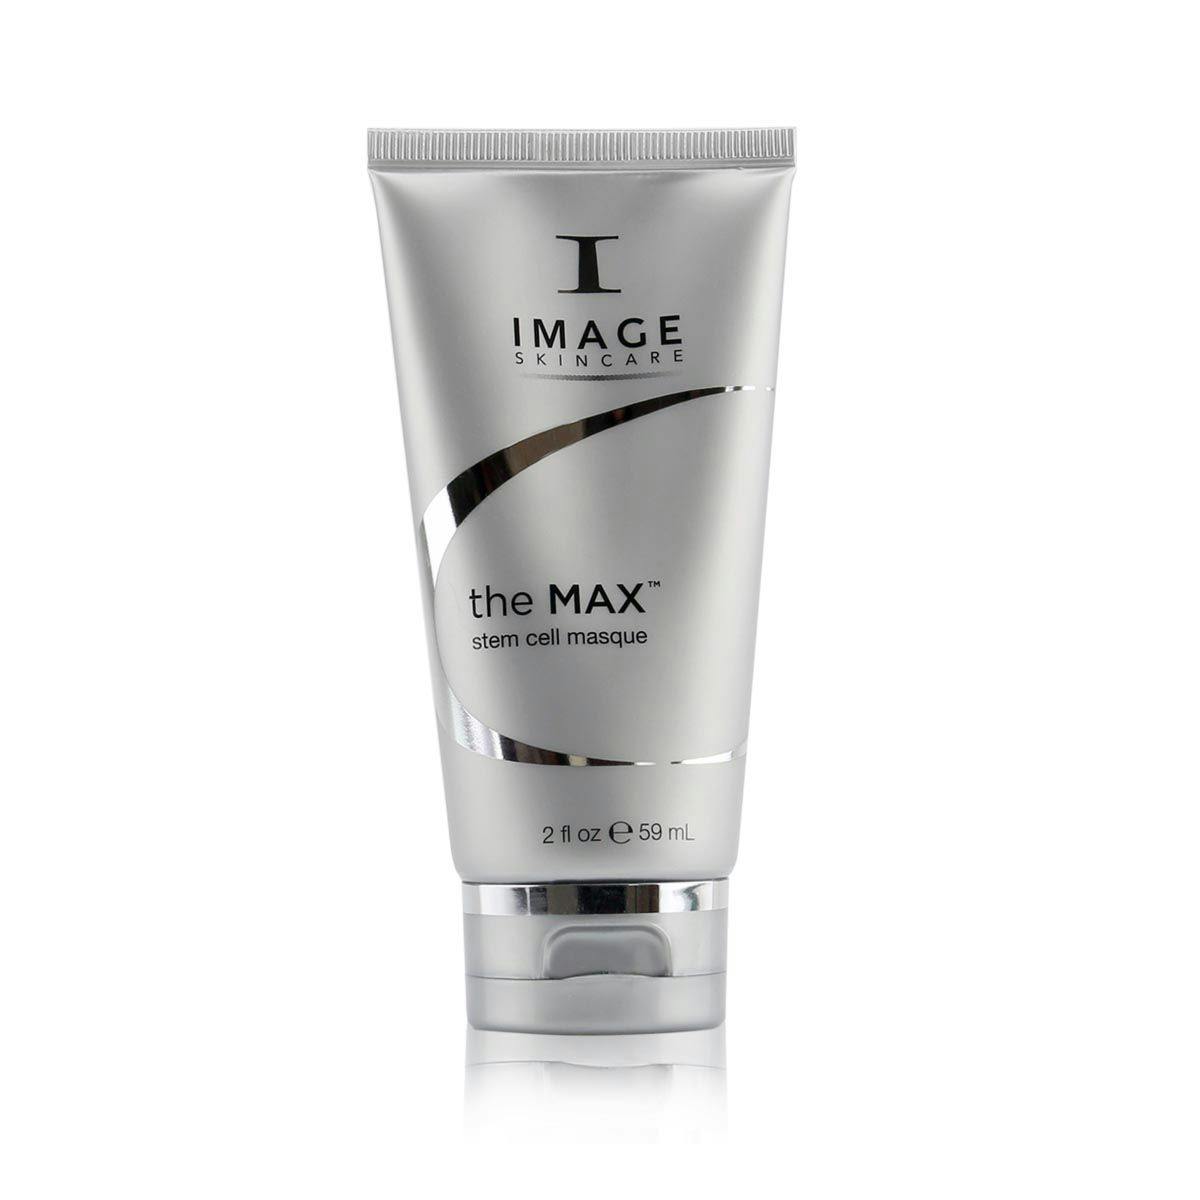 Image Skincare The MAX Stem Cell Masque 59ml